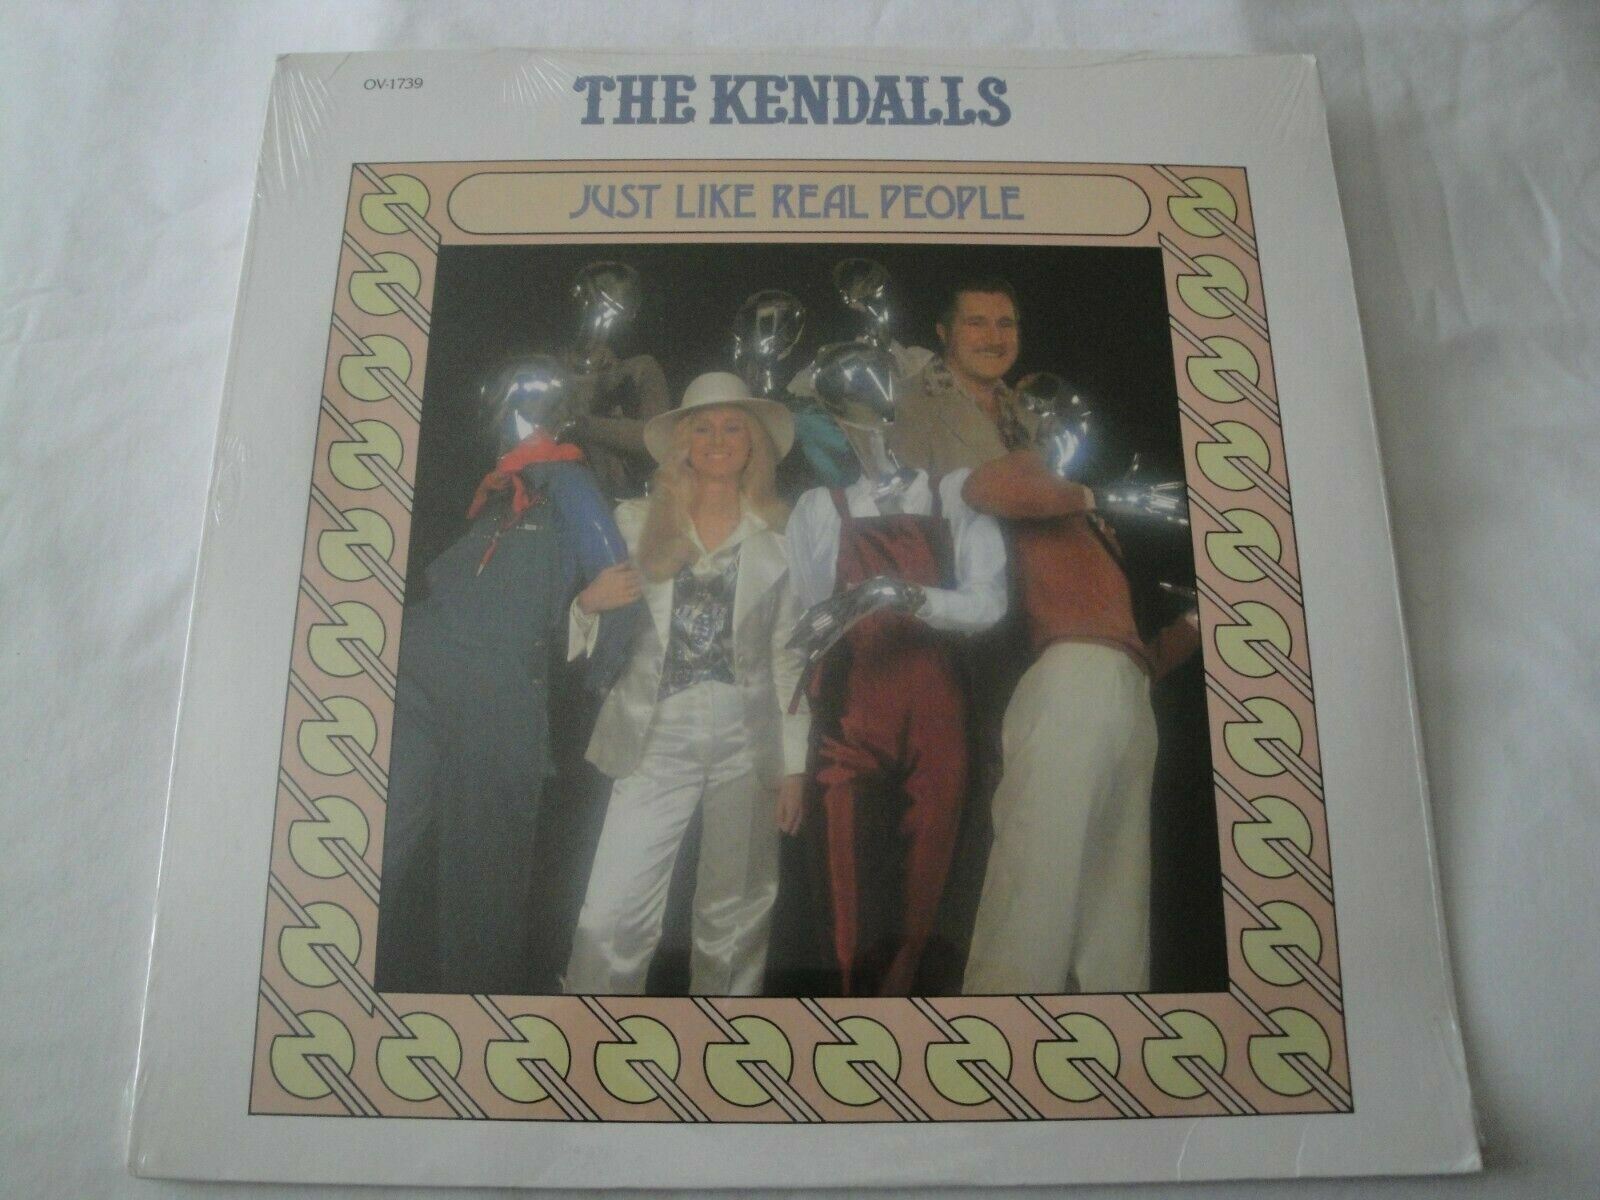 THE KENDALLS - just like real people VINYL LP ALBUM 1979 OVATION RECORDS NEW 